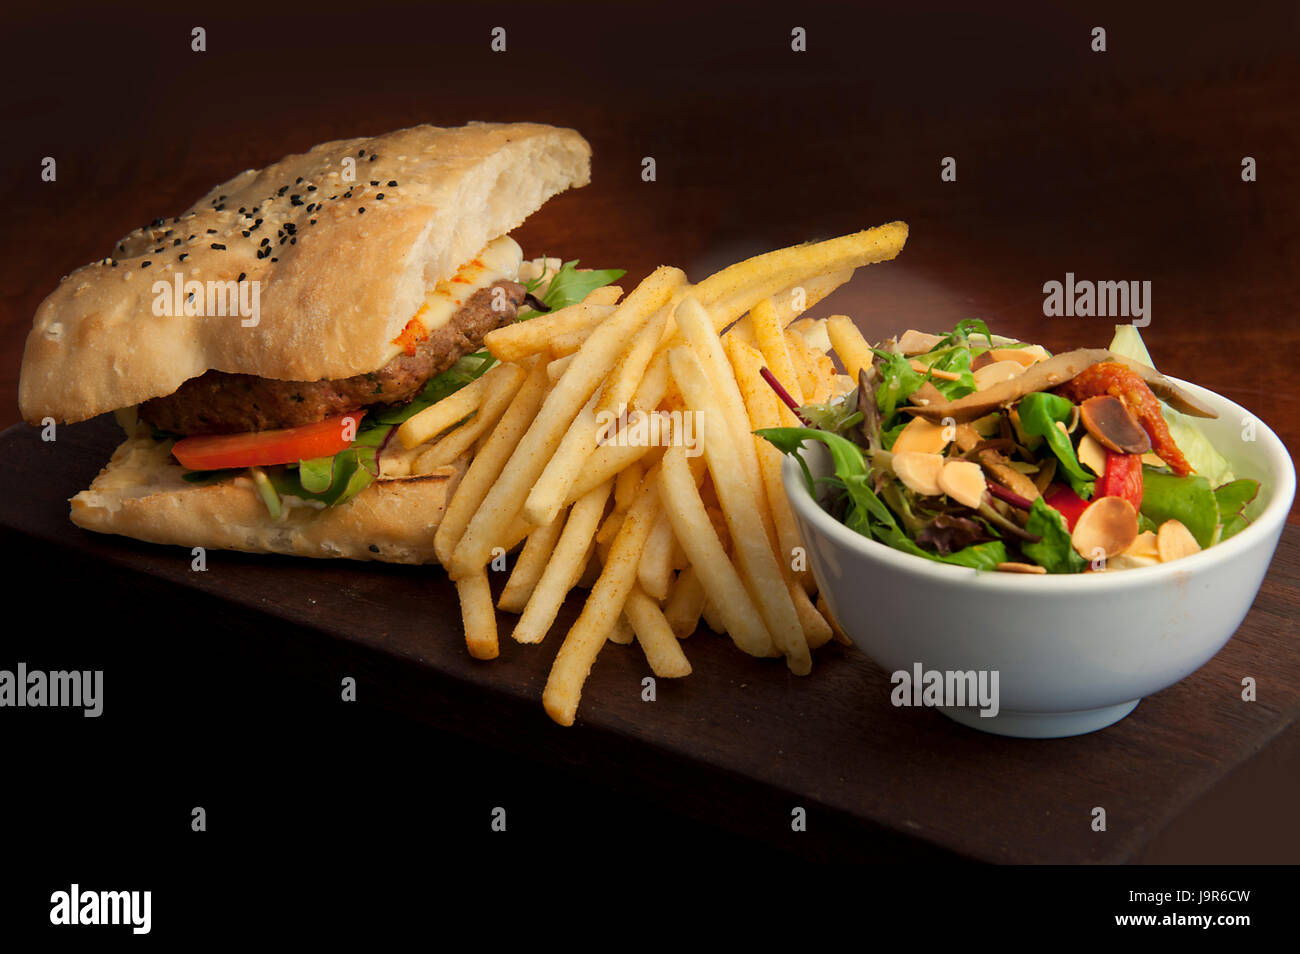 Modern Australian plated meals, served as light food in faces and restaurants Stock Photo